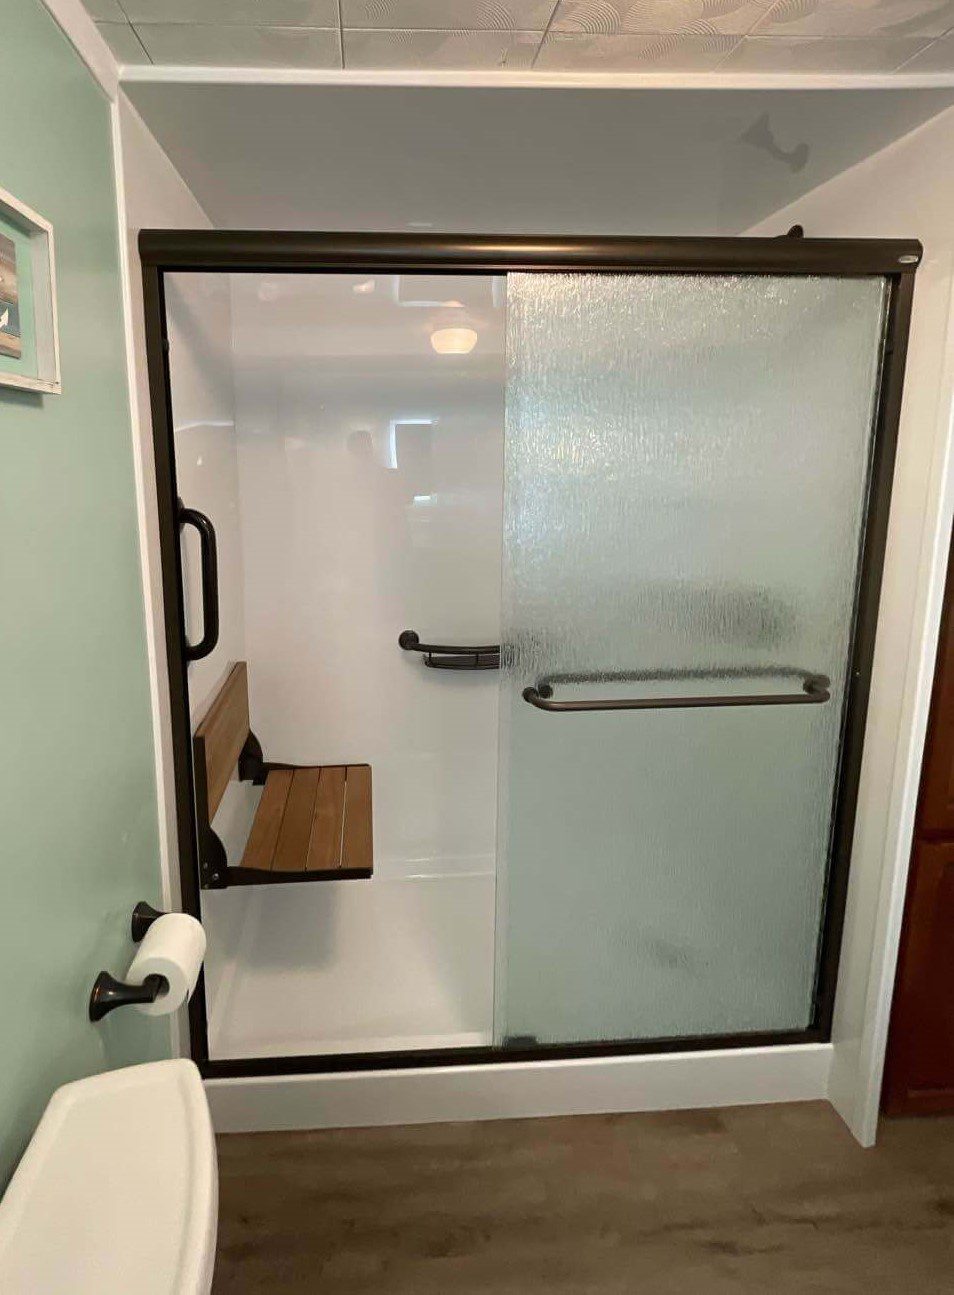 Accessible walk-in shower complete with safety accessories.